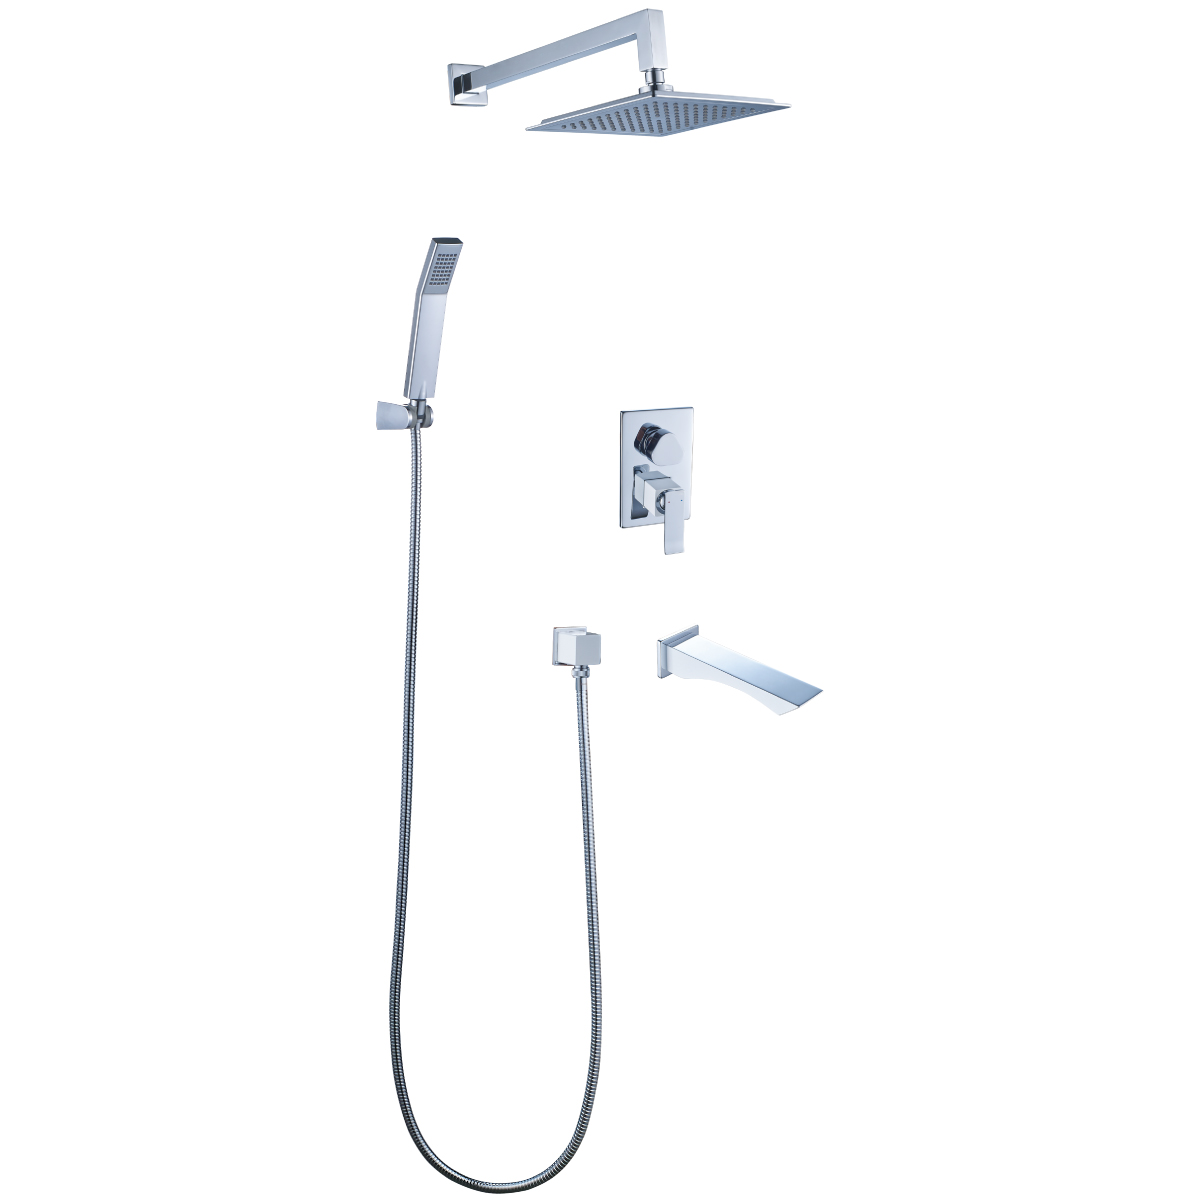 LM5822CW Built-in bath and shower faucet